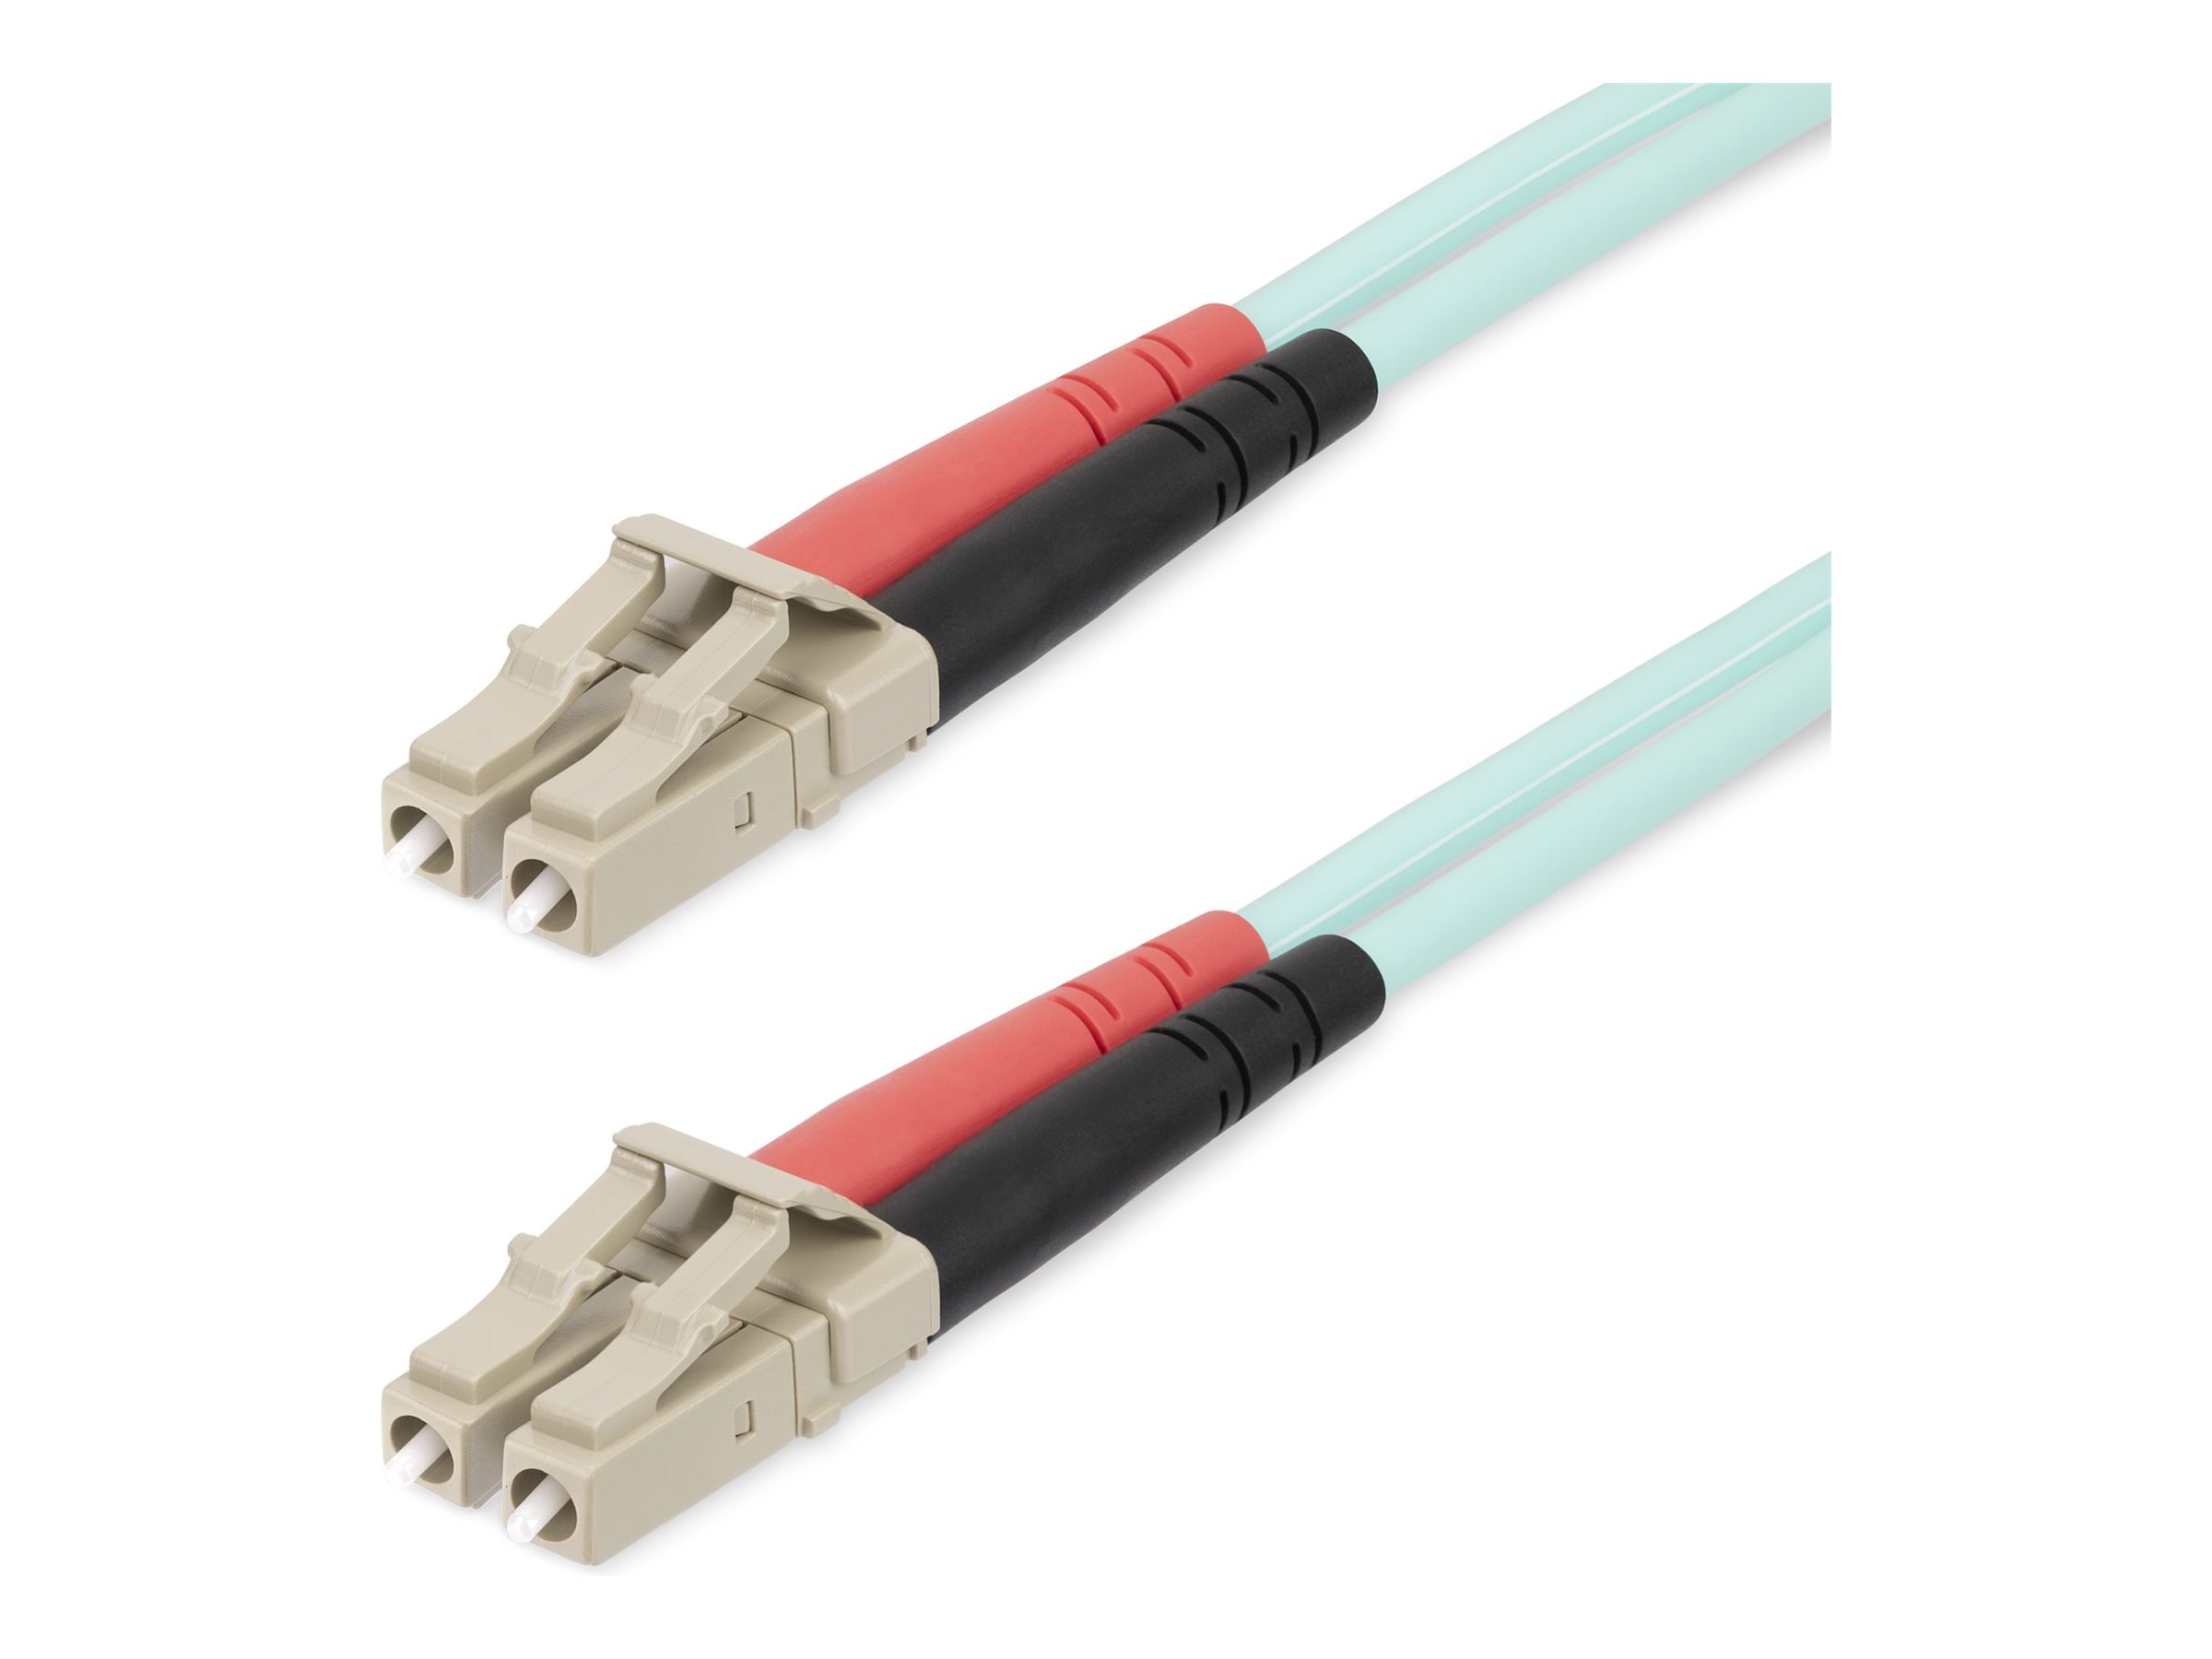 StarTech.com 25m (82ft) LC/UPC to LC/UPC OM4 Multimode Fiber Optic Cable, 50/125m LOMMF/VCSEL Zipcord Fiber, 100G Networks, Low